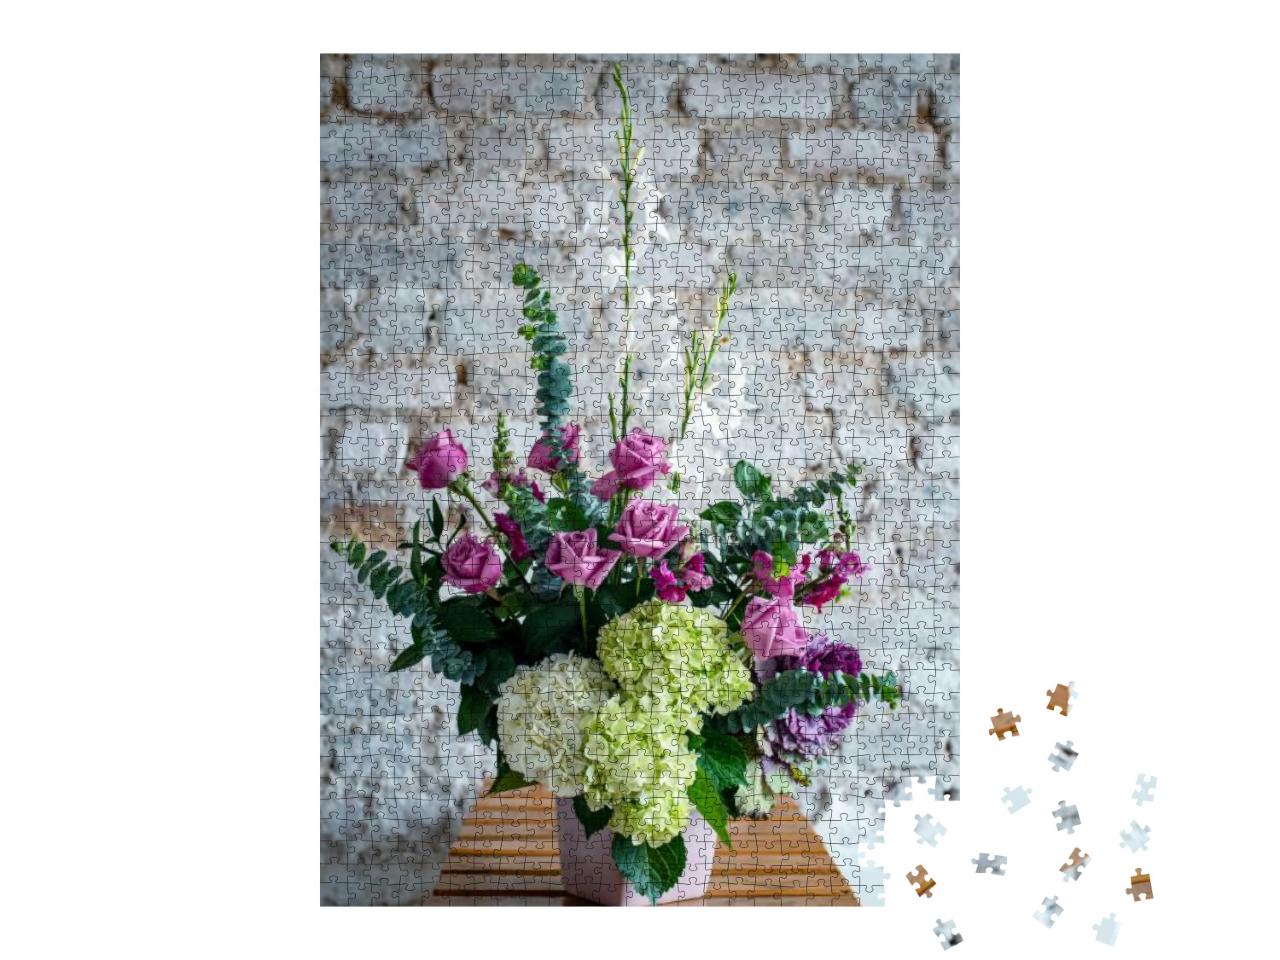 Decorative Flowers of Colombia, Floral Arrangements... Jigsaw Puzzle with 1000 pieces